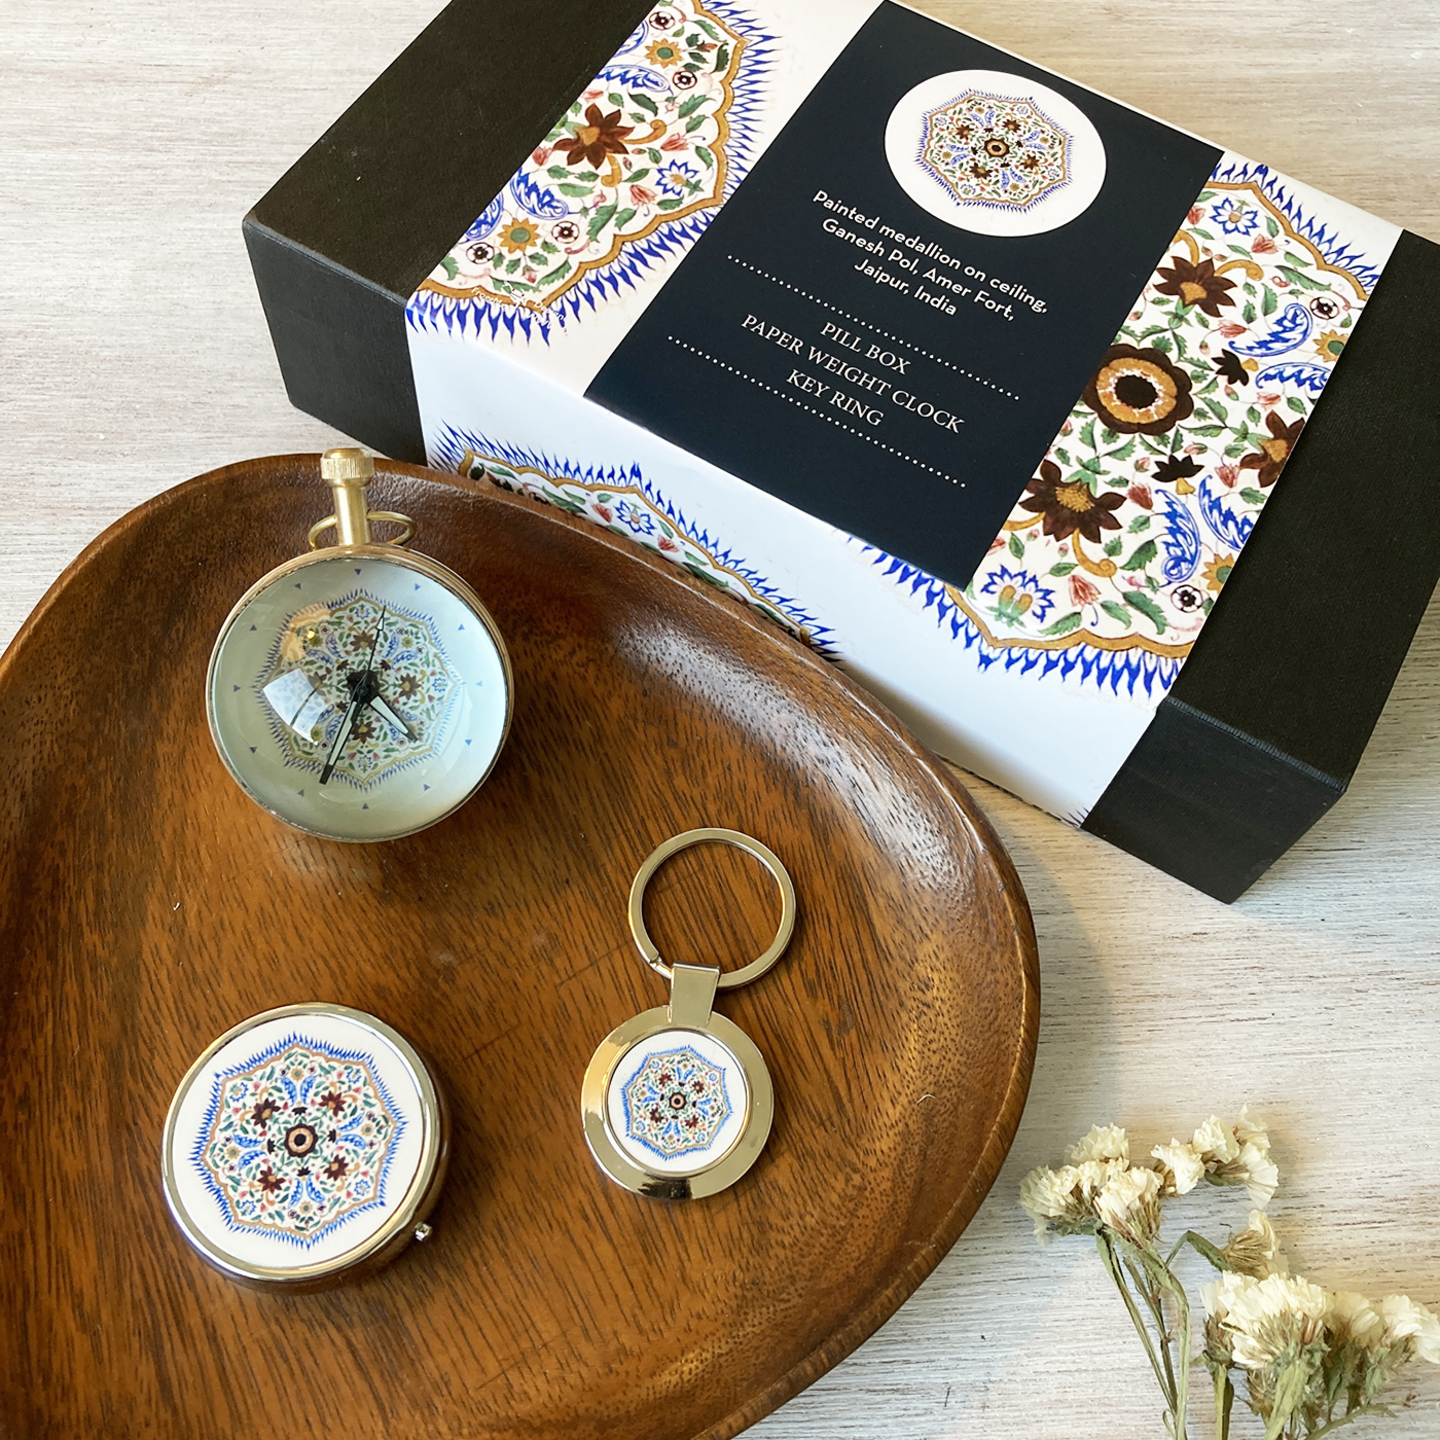 Gift Set  - Pill Box, Paper Weight Clock, Key Ring,  Painted Medallion, Amer Fort